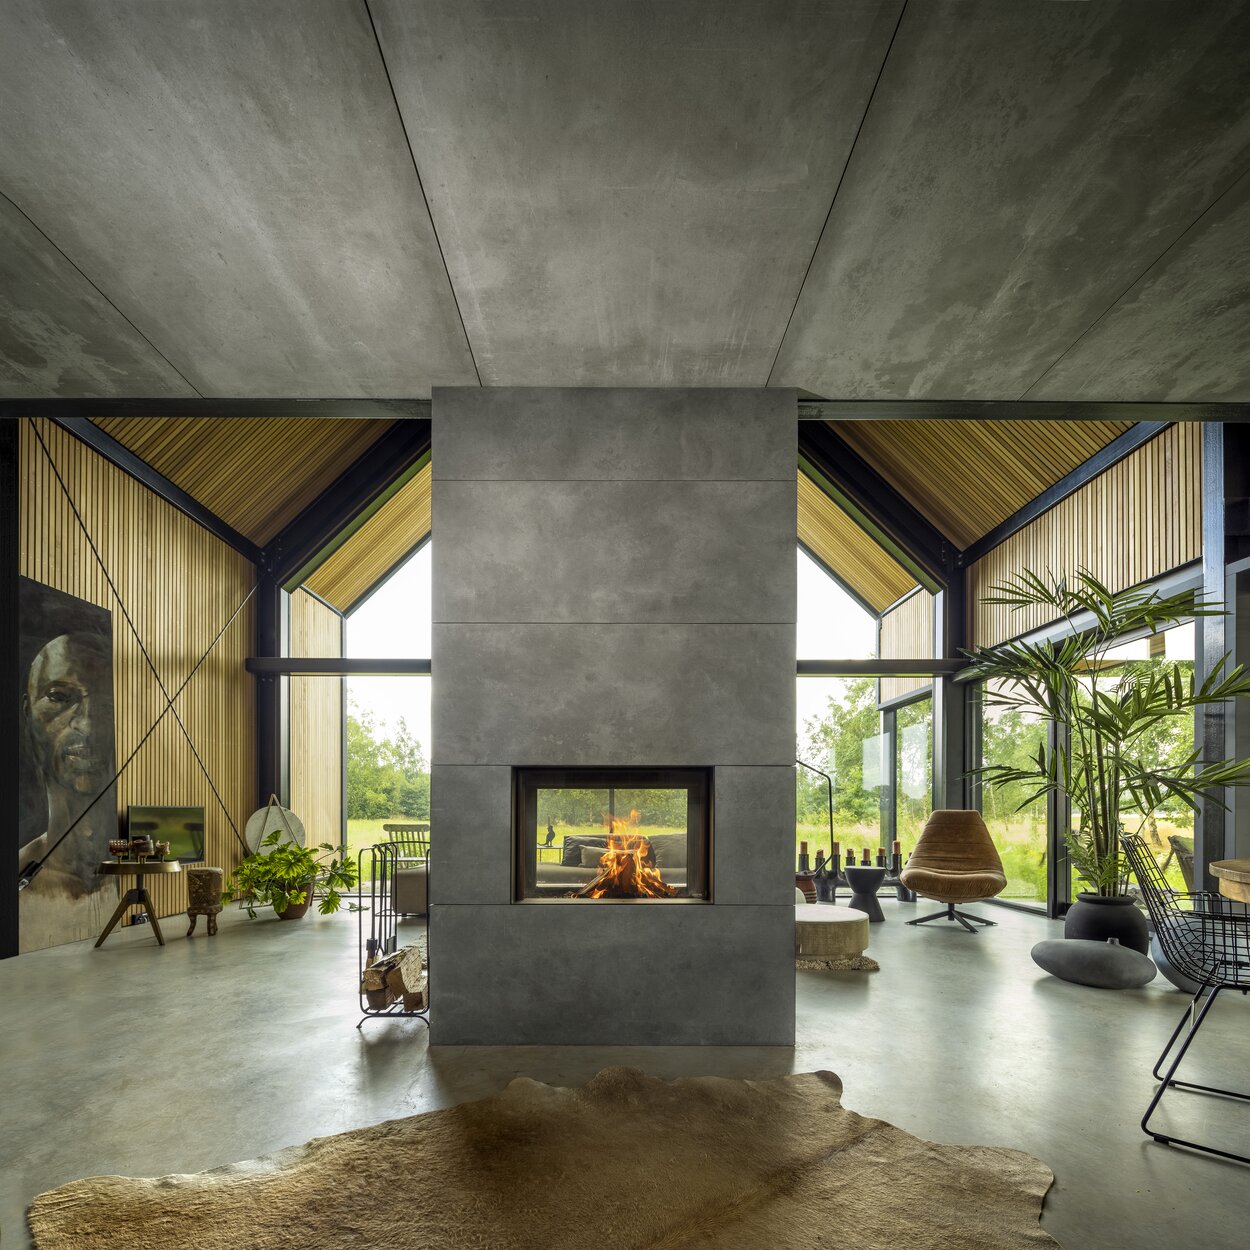 Wood fireplace W80/52T by Kalfire as the centre of the house with natural furnishings and a view of the natural surroundings through the tunnel fireplace